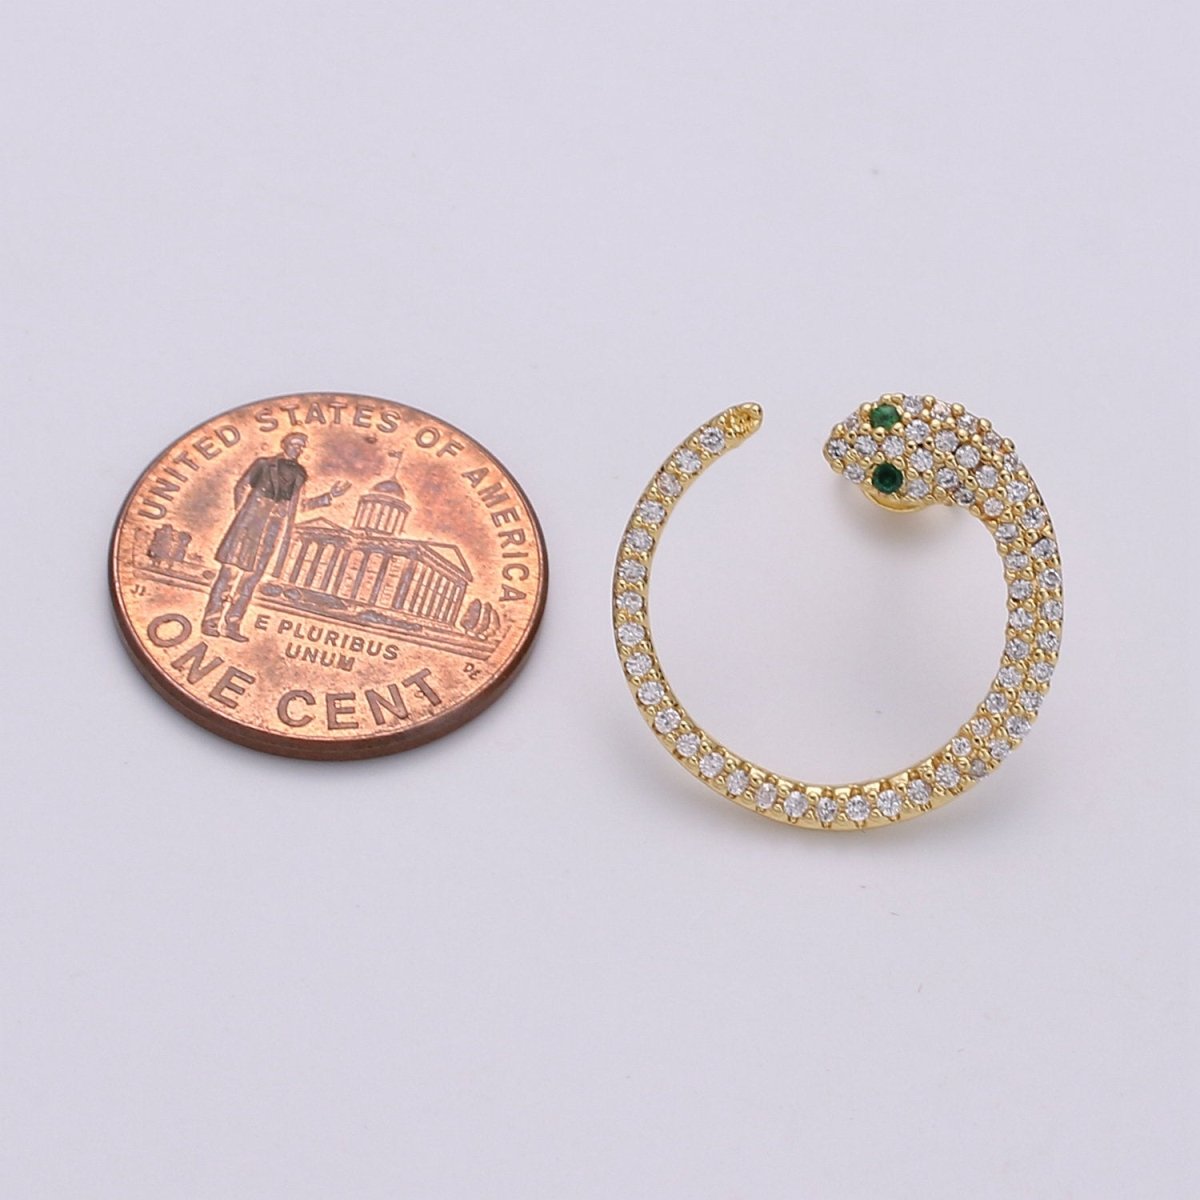 24k Gold Filled Snake Stud Earring, Micro Pave Snake Earring for DIY Earring Craft Supply Jewelry Making Supply Silver Serpent Earring Stud Q-140 Q-141 - DLUXCA